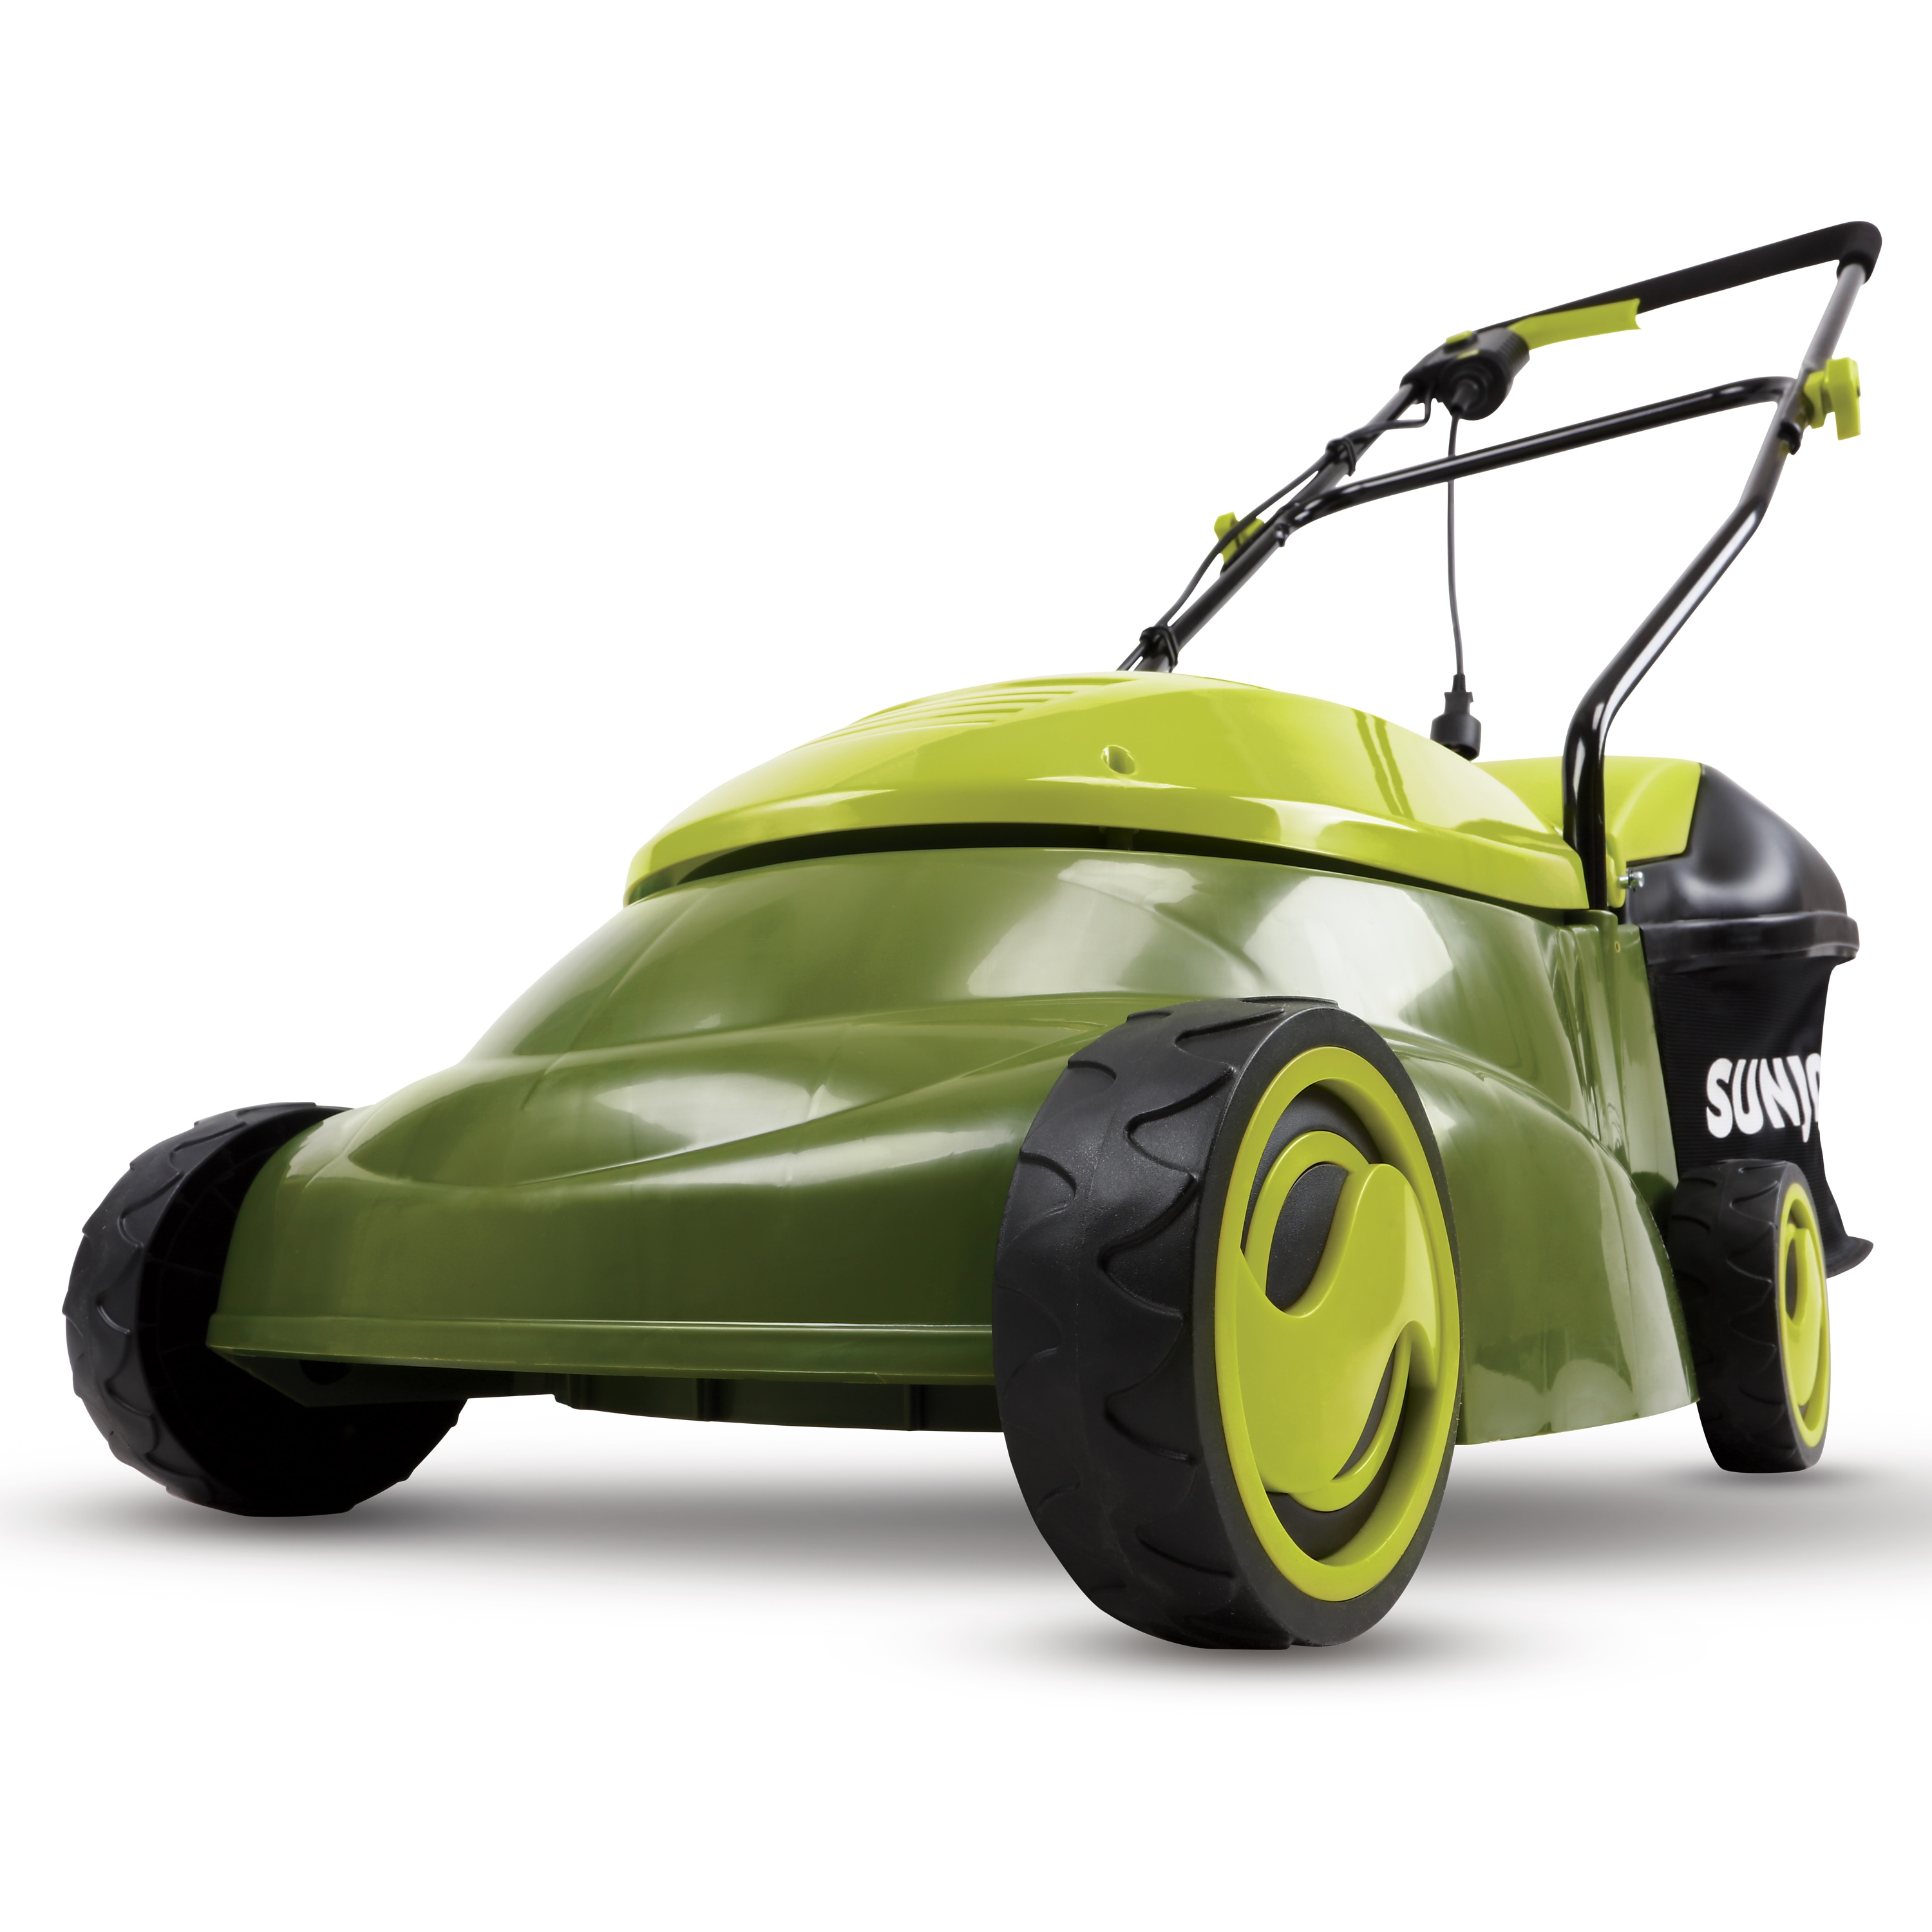 Electric Lawn Mower, 13-Amp, Corded